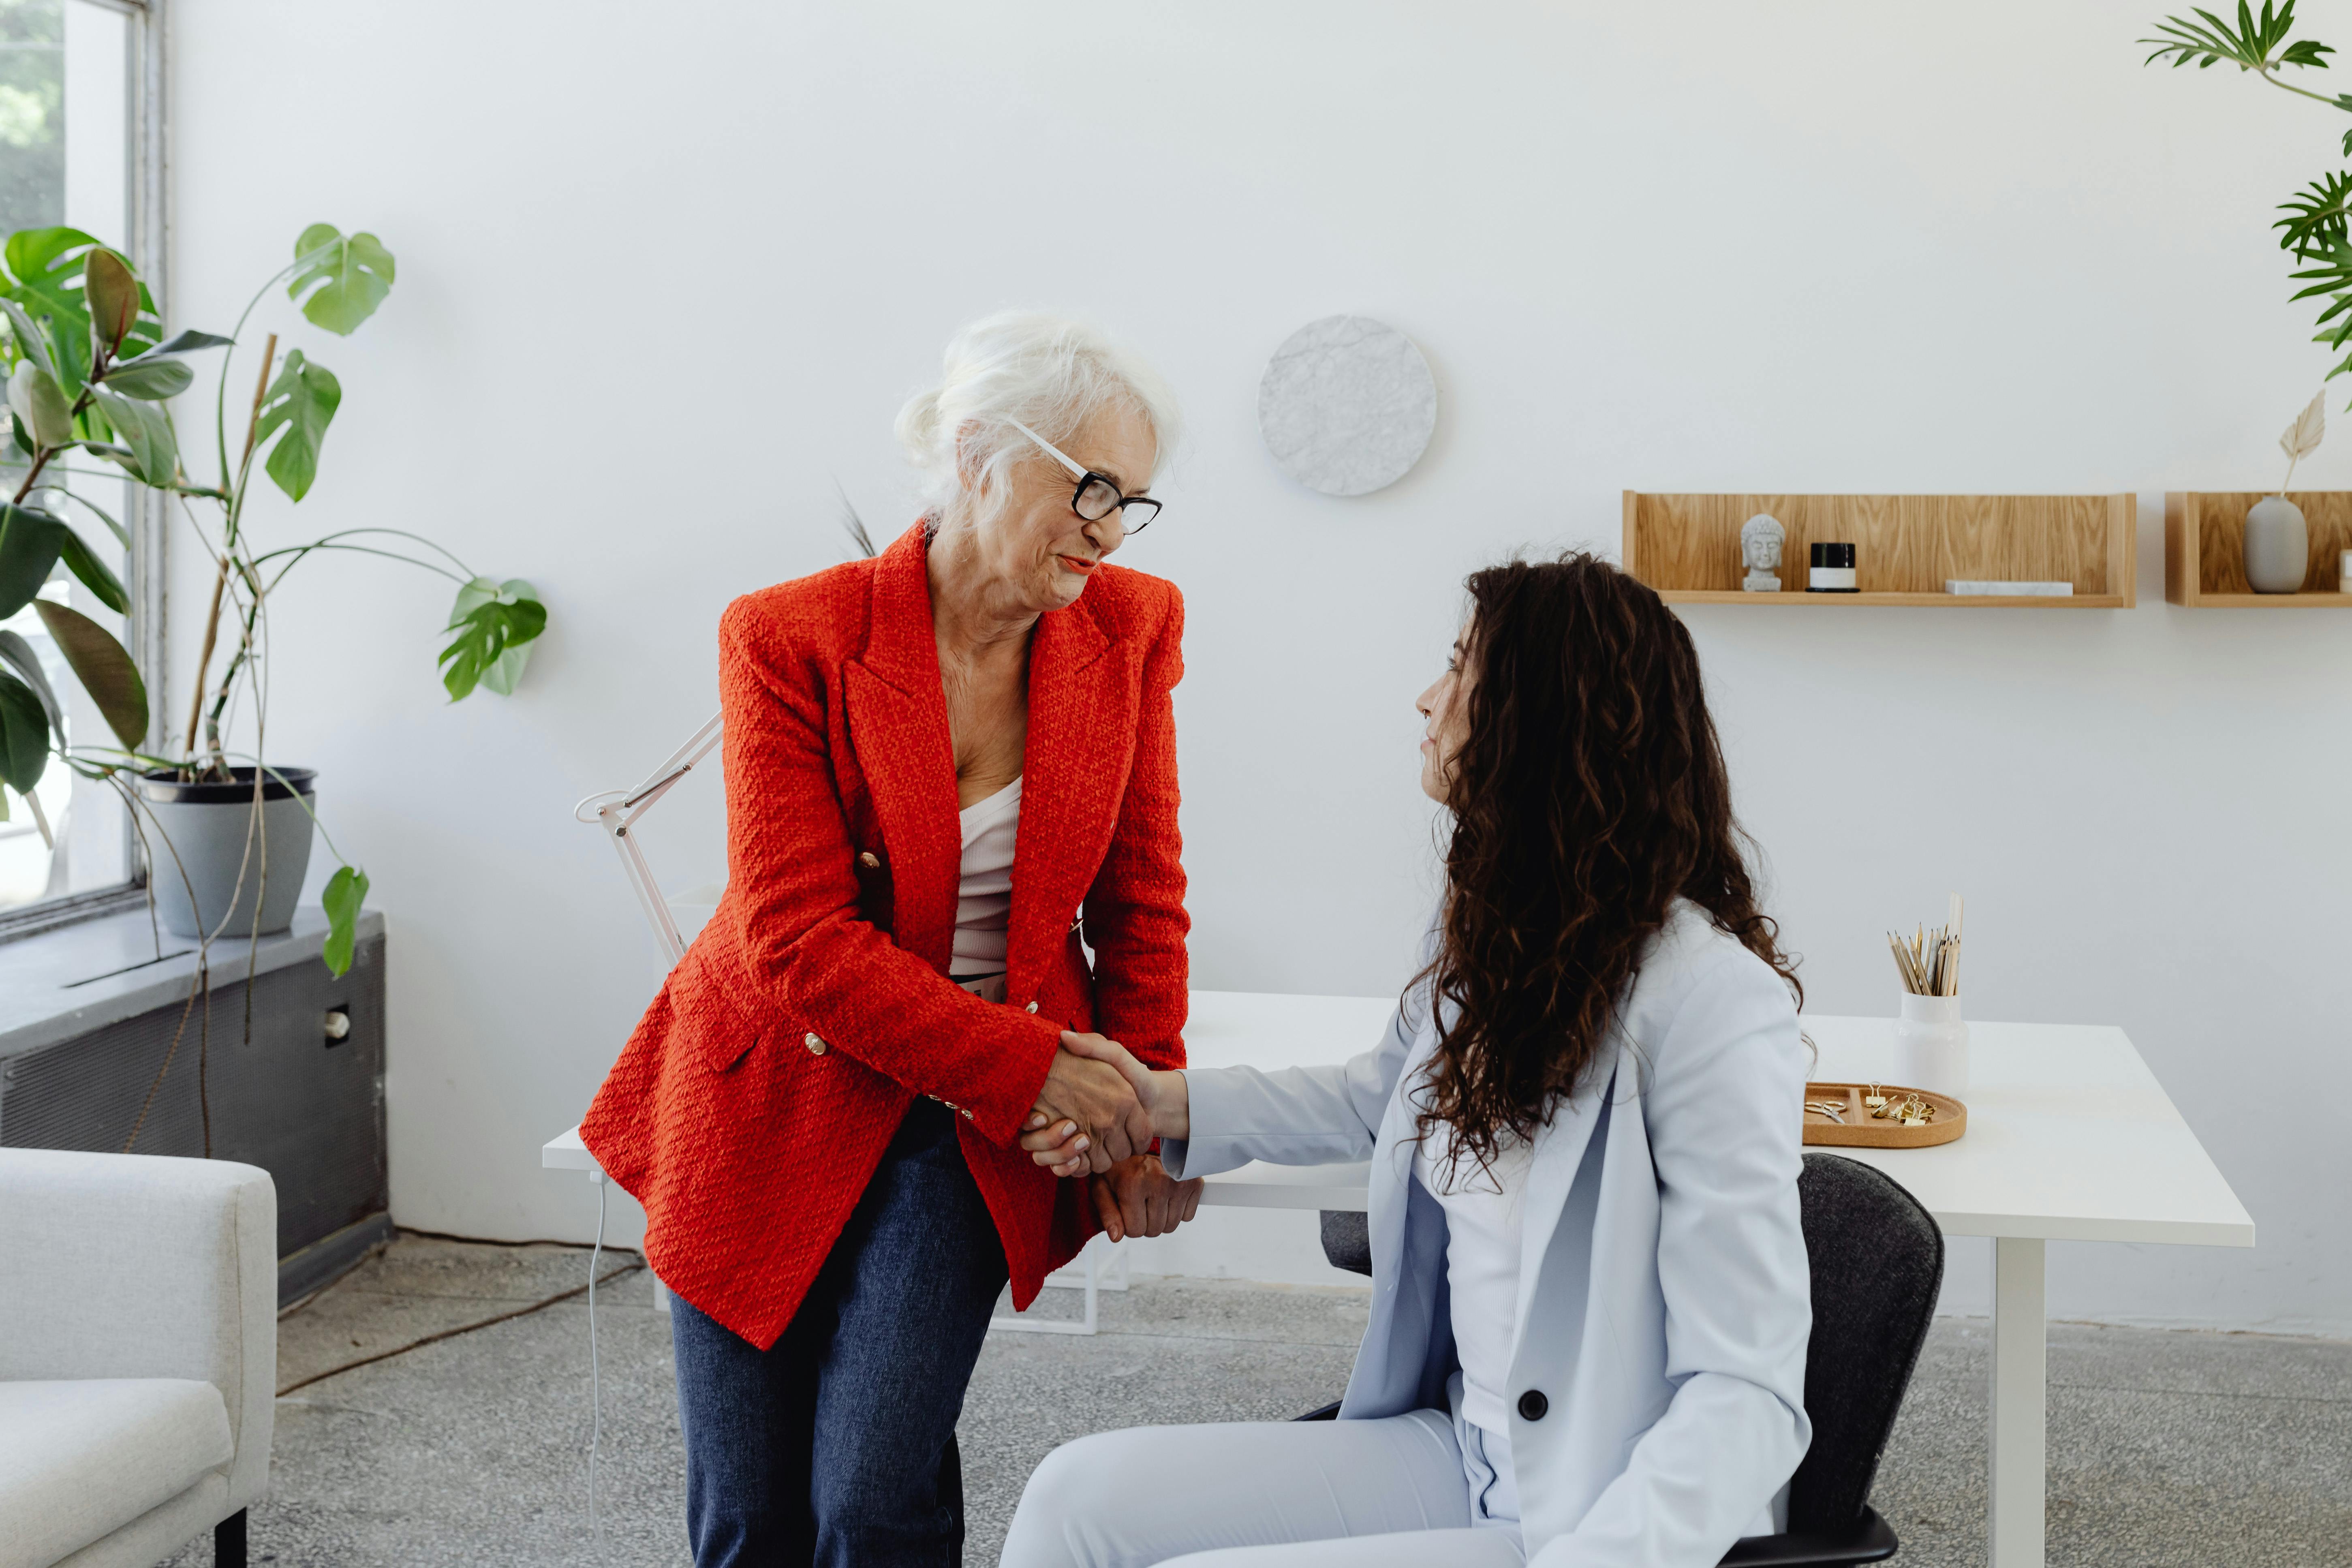 An older woman bonding with a younger one | Source: Pexels